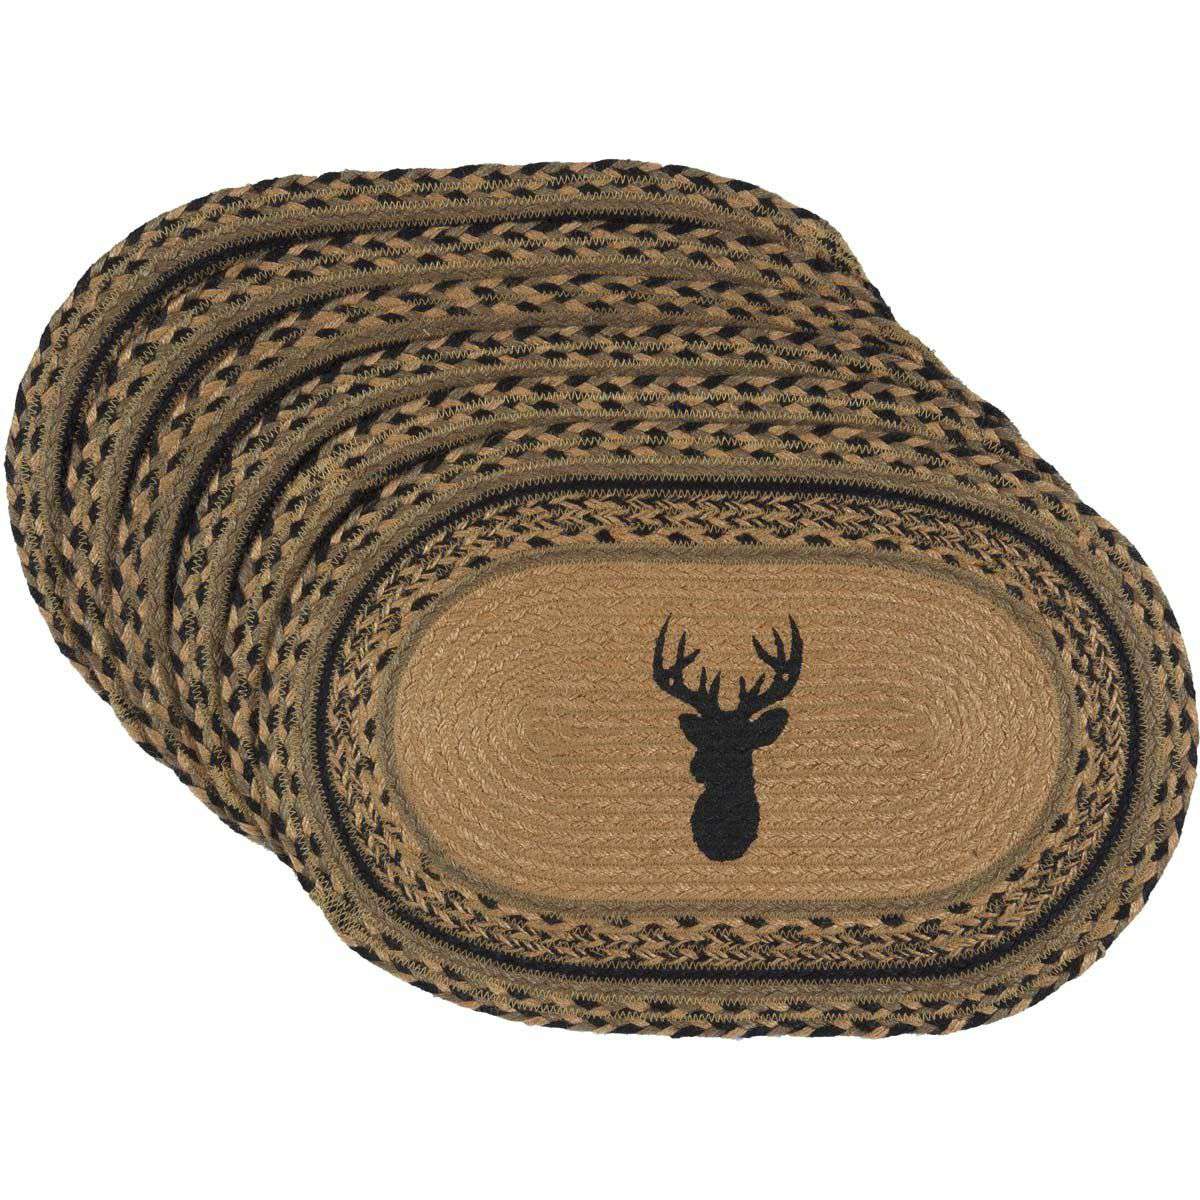 Trophy Mount Jute Braided Placemats Set of 6 - The Fox Decor